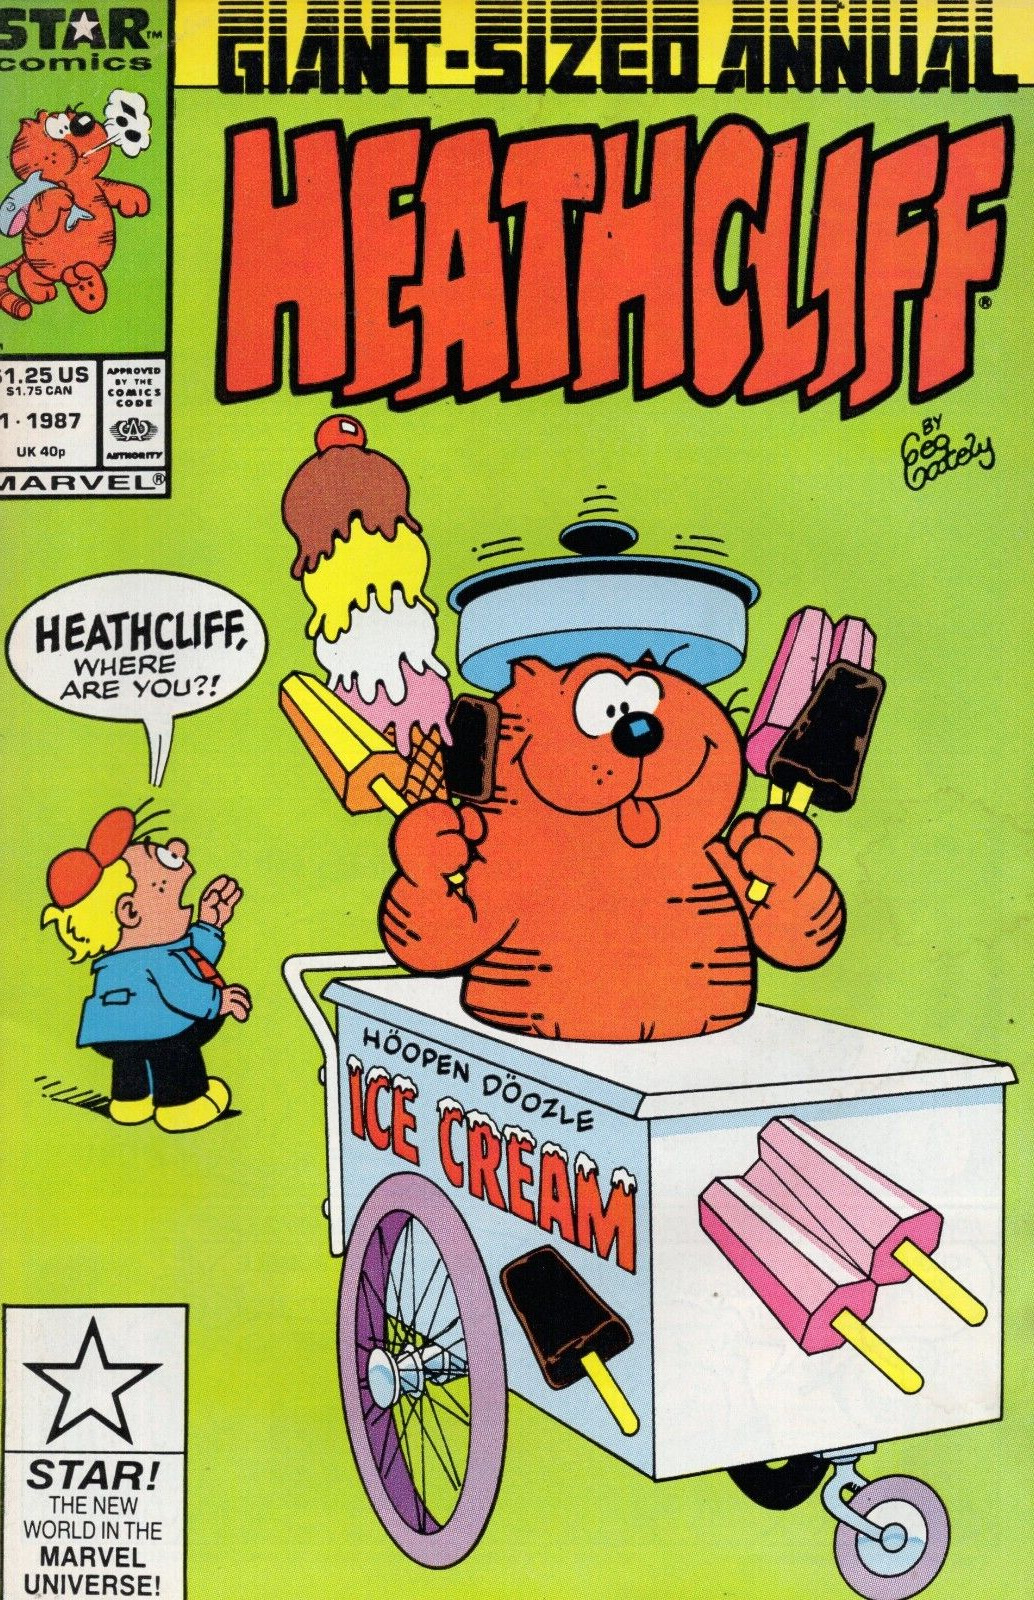 Heathcliff Annual #1 1987 Unread, Uncirculated, but has small stain on cover